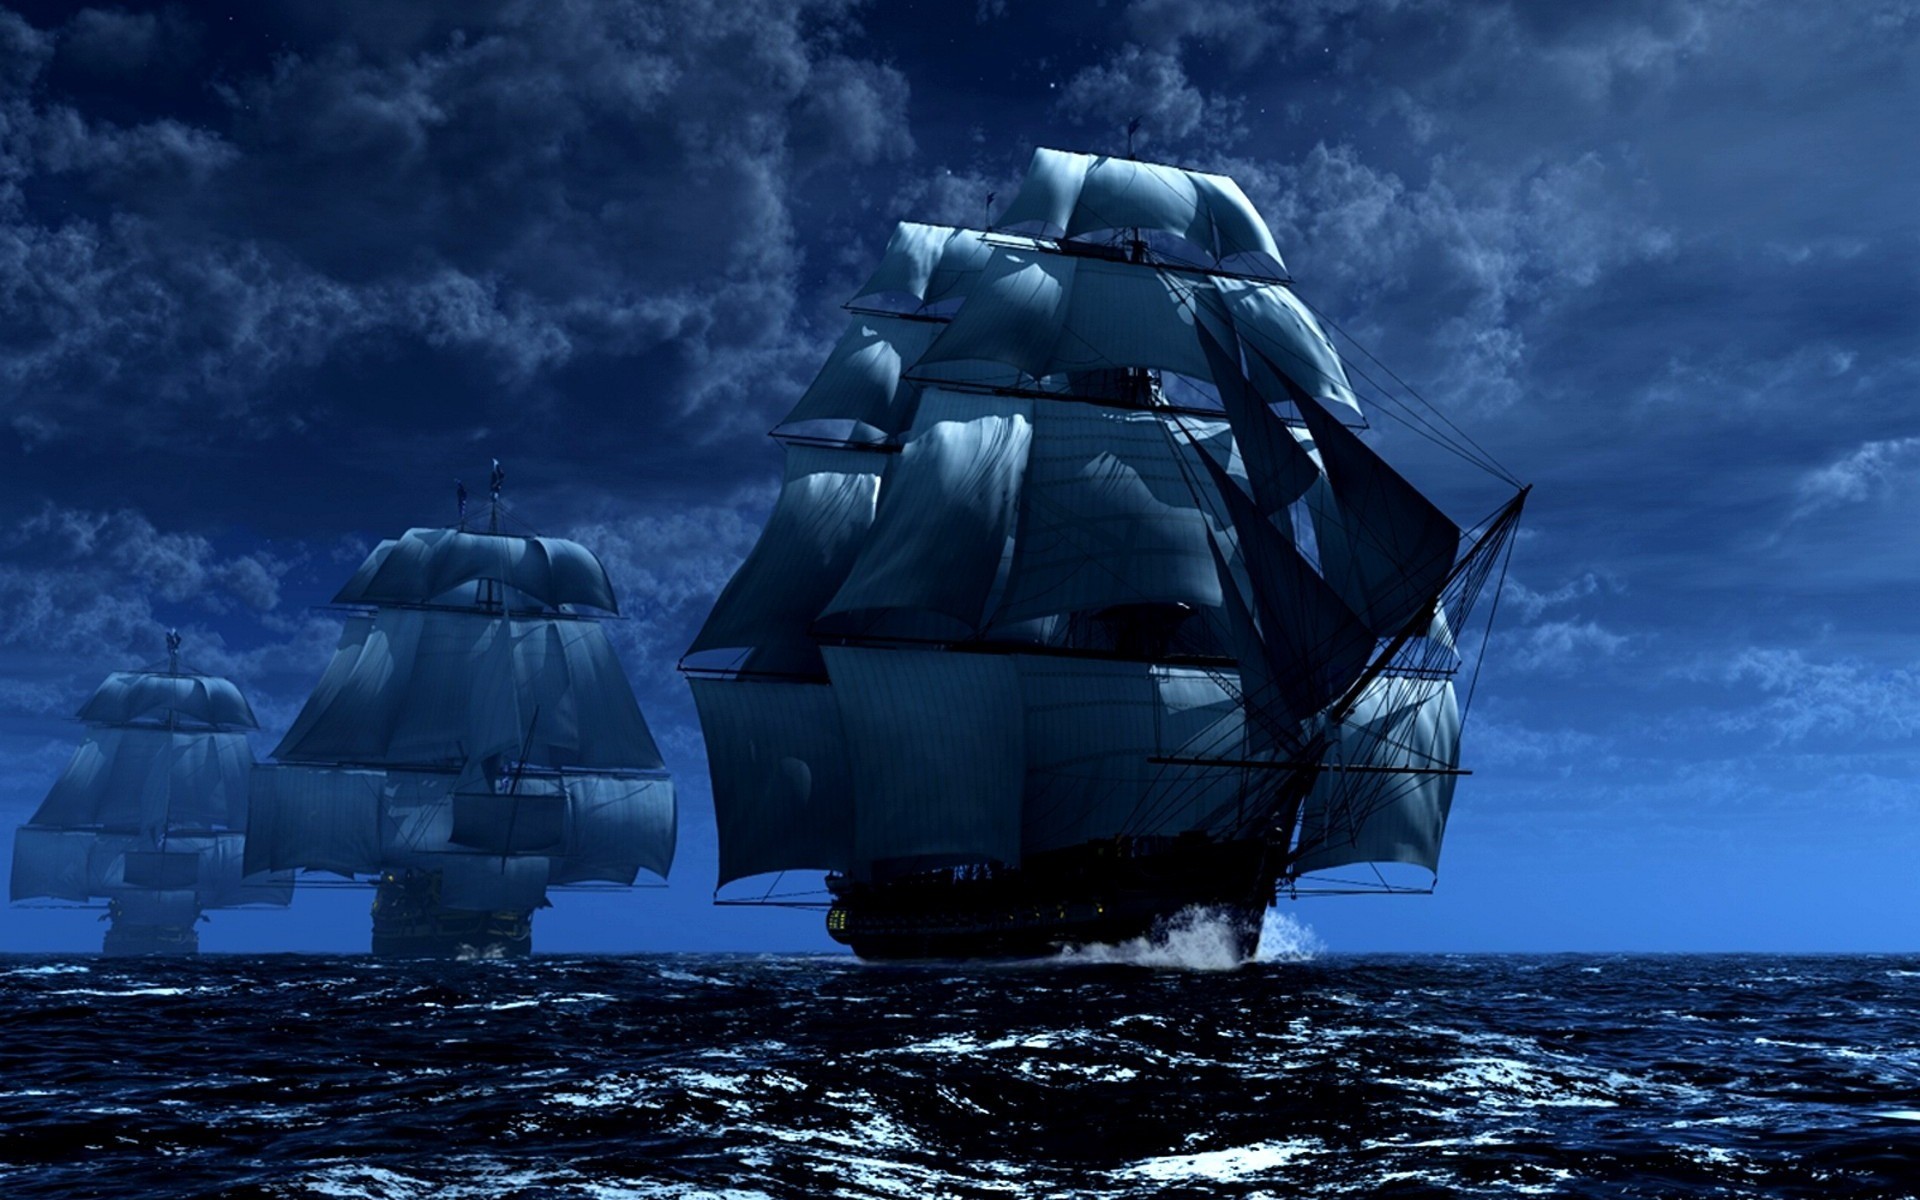 1920x1200 The sailing ships wallpapers and images - wallpapers, pictures, photos